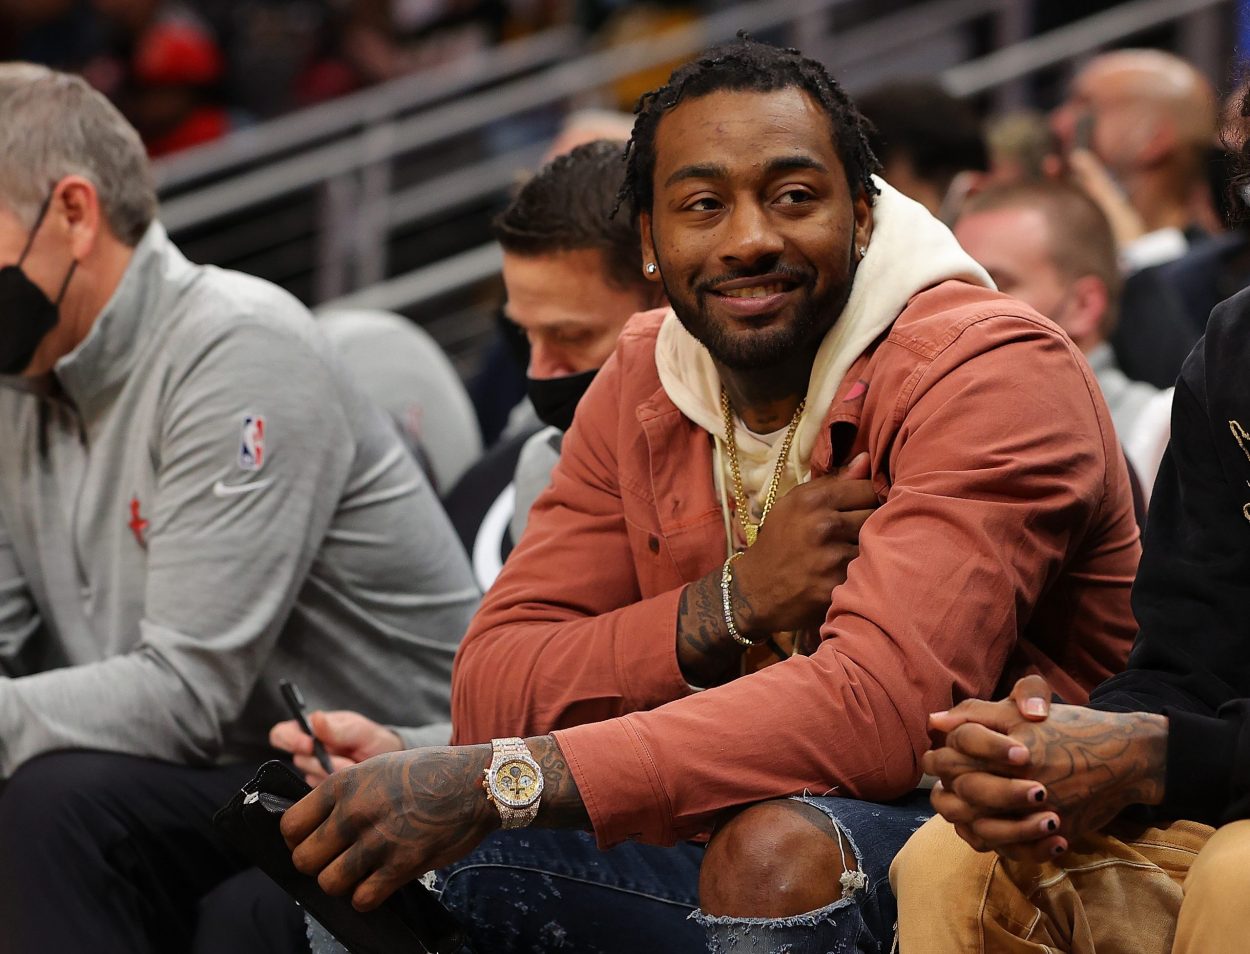 John Wall Pulls a Ben Simmons With Instagram Shooting Video, but It Does Nothing to Boost His Trade Value